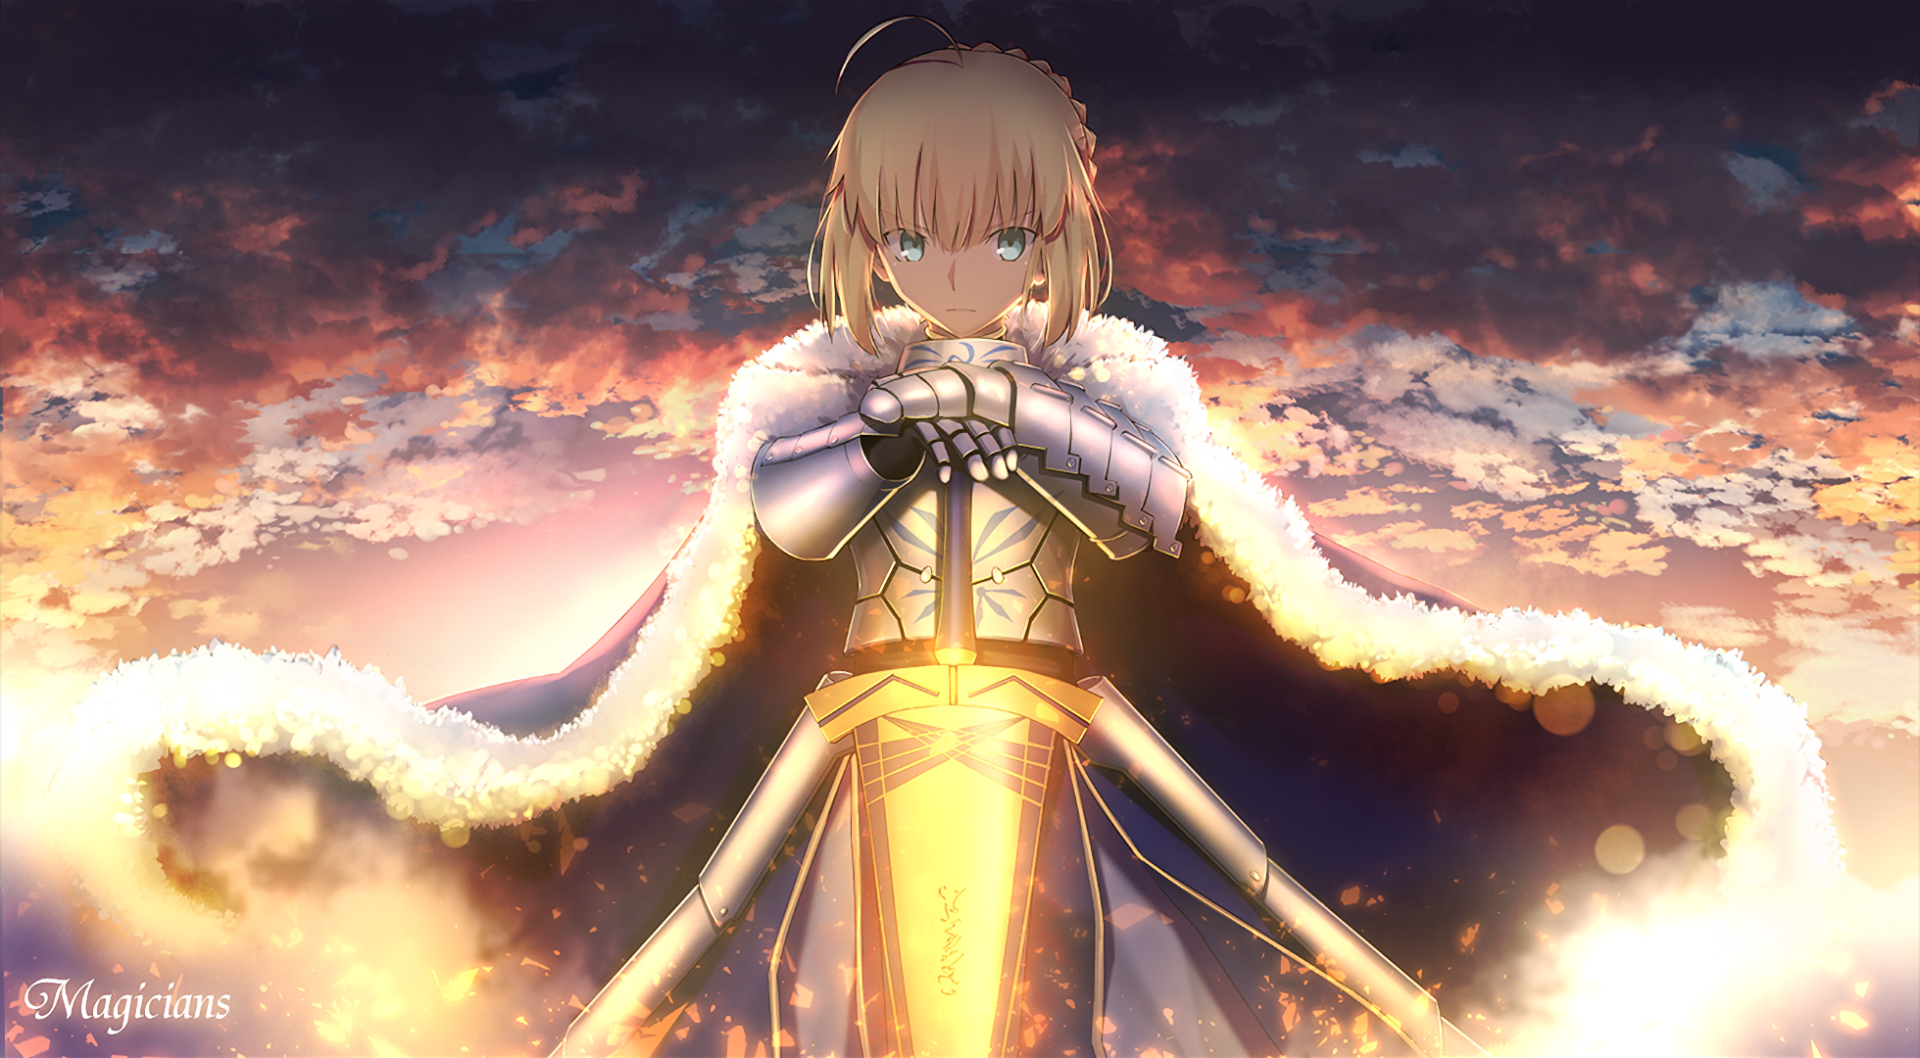 Fate/Stay Night HD Wallpaper by Magicians